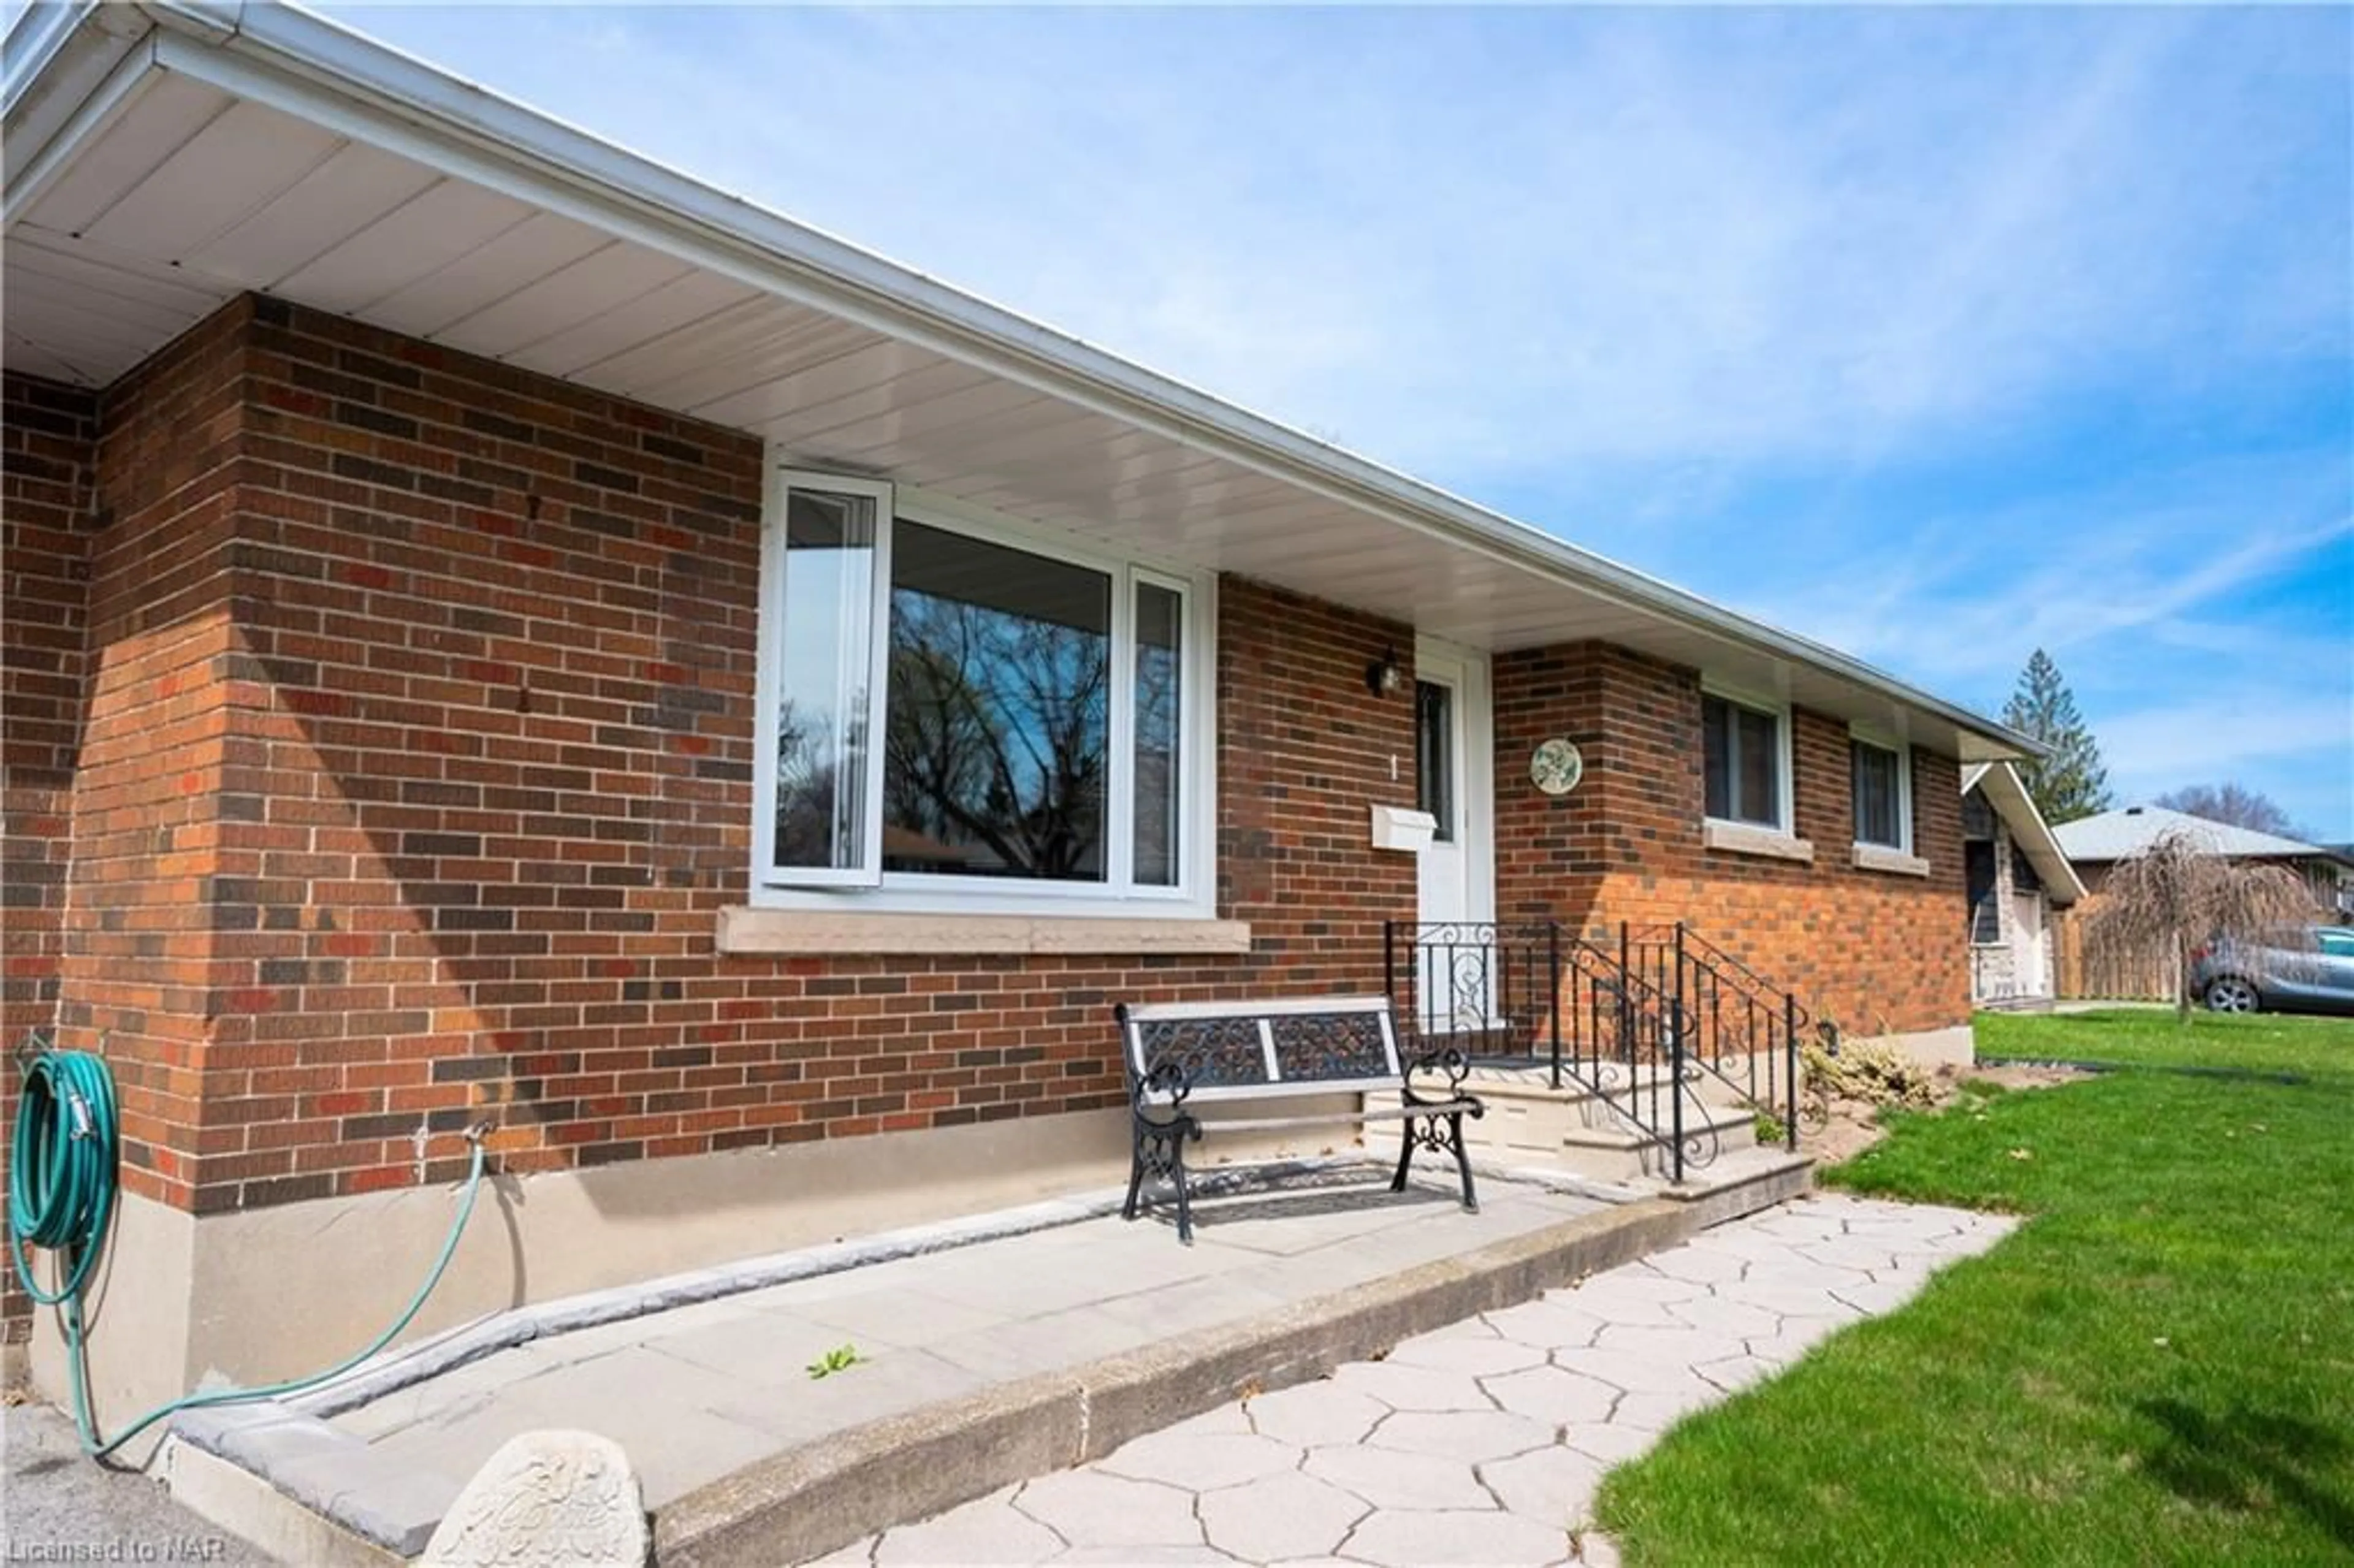 Street view for 1 Armour Dr, Welland Ontario L3C 2N7